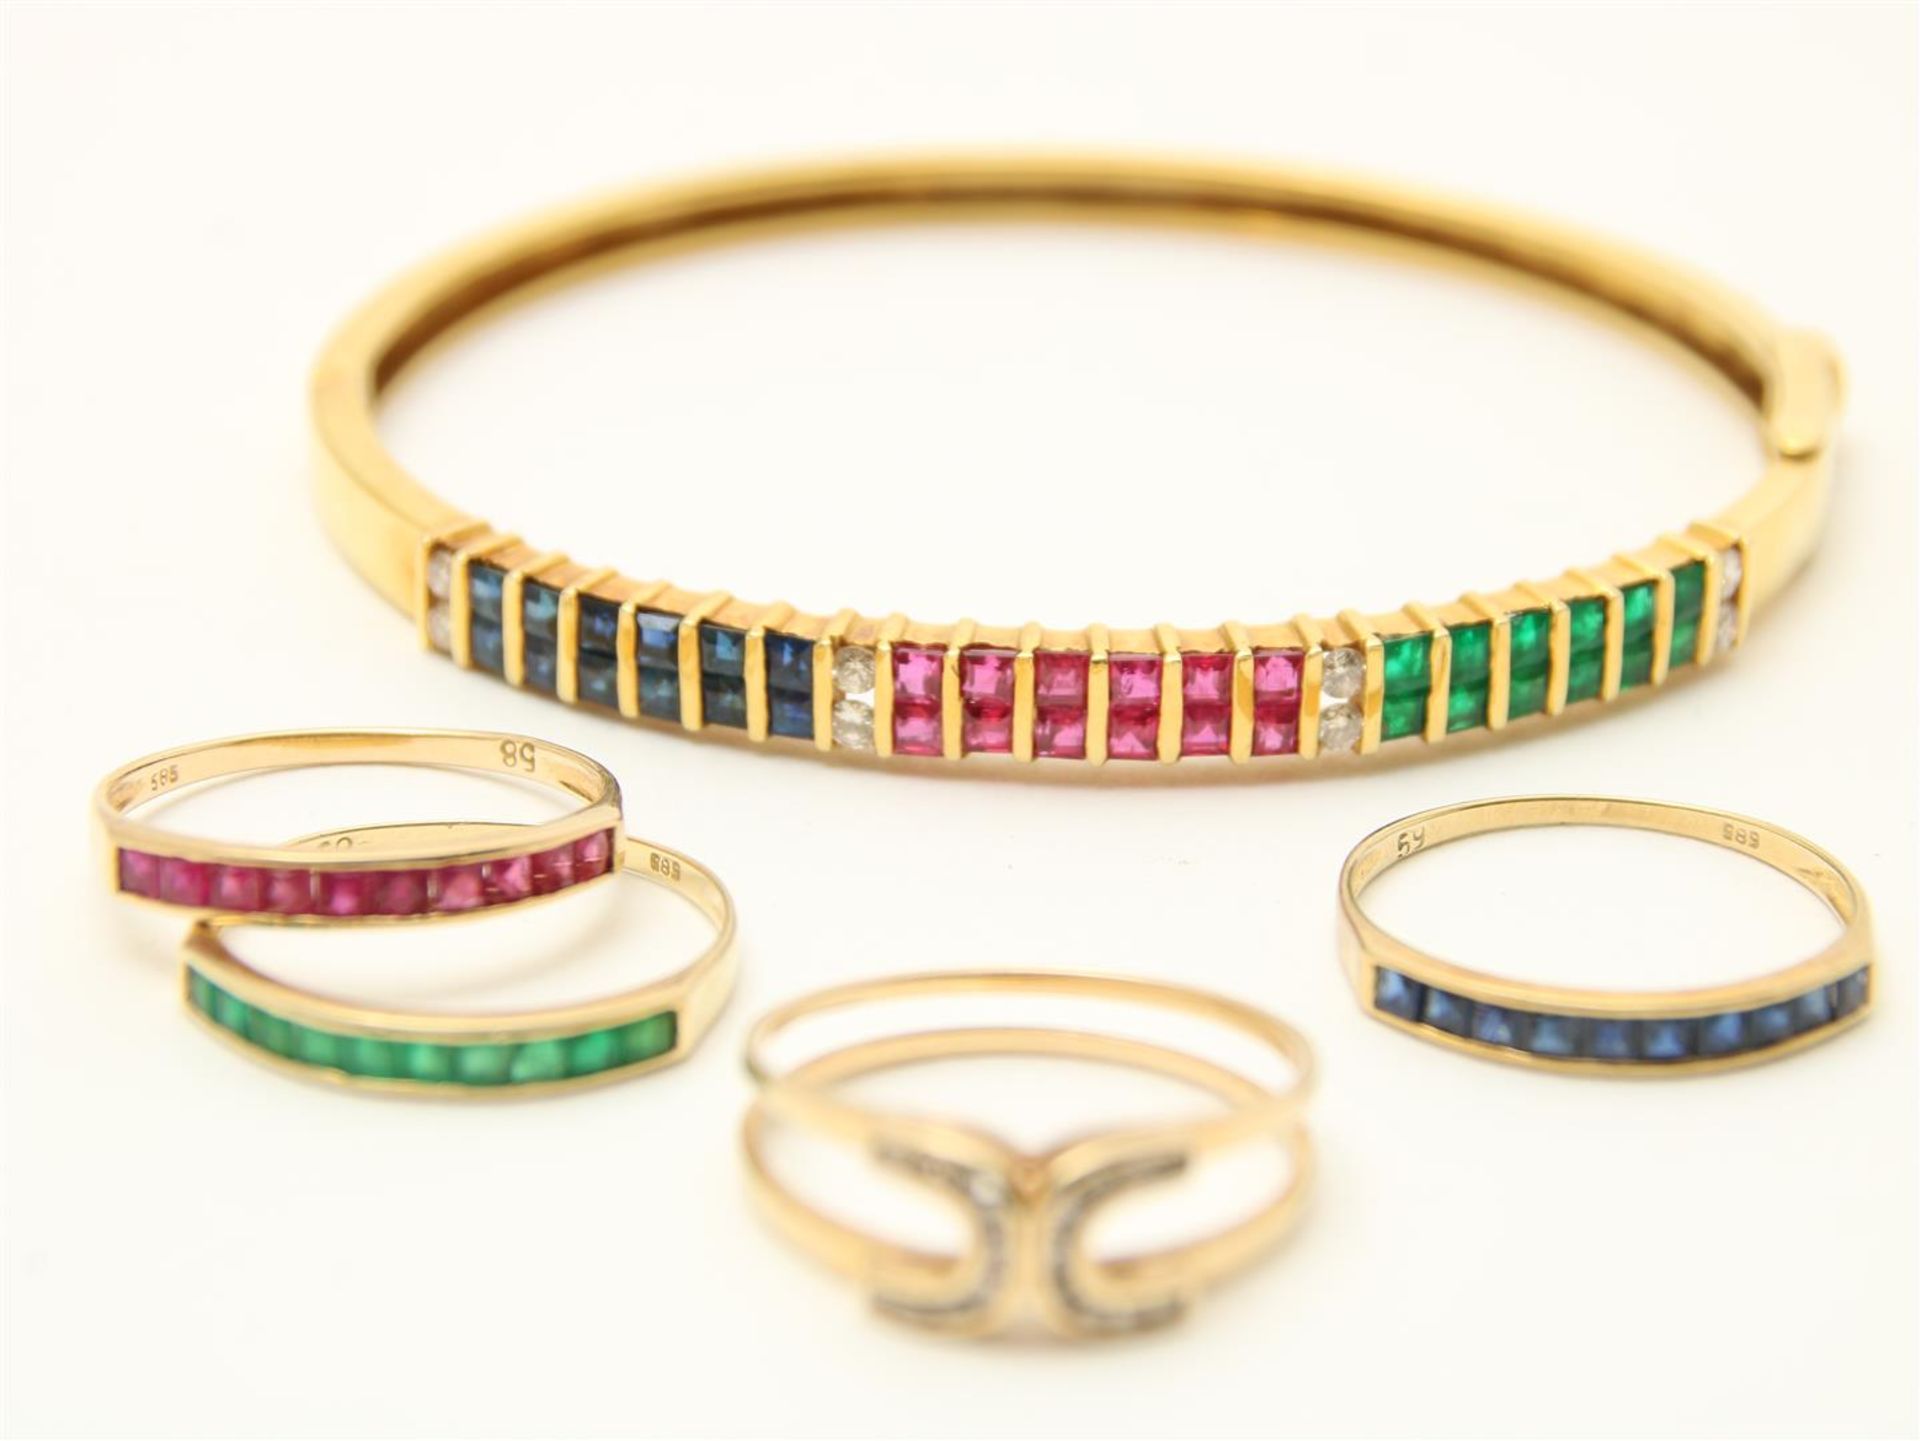 Yellow gold rigid bracelet set with sapphires, rubies, emeralds and diamonds, grade 750/000. And a